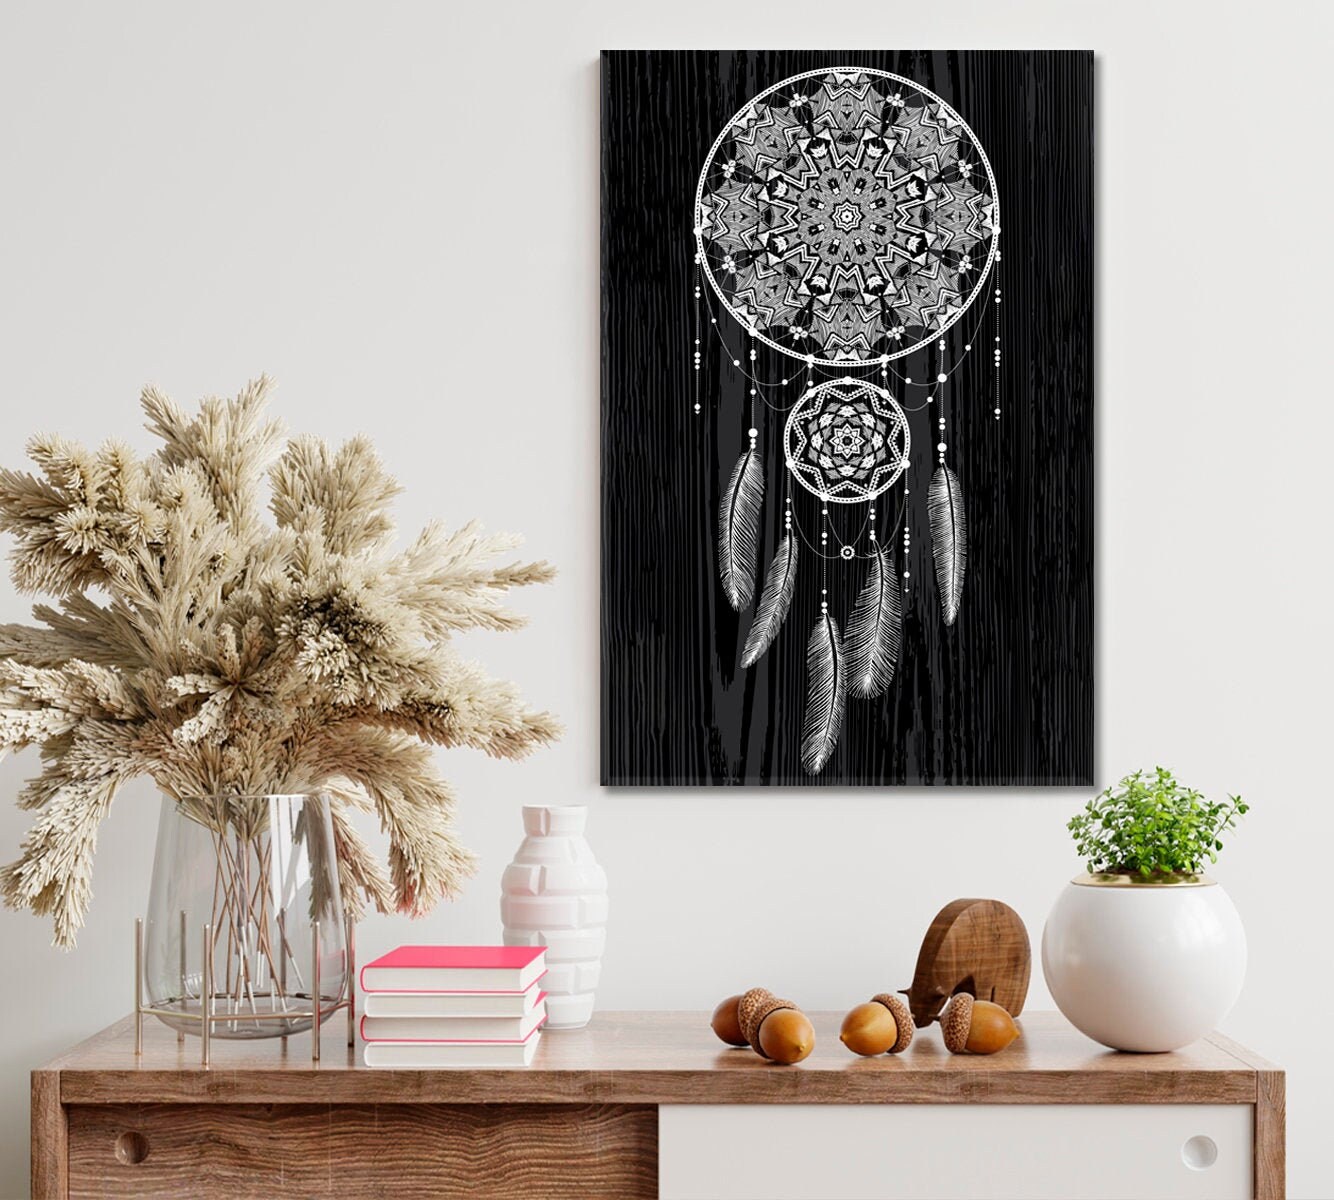 Qianli White Two Net Dream Catcher Rings, Large Dream Catcher with 2  Circles for Bedroom Decor Mobile Wall Decor Girl Gift for